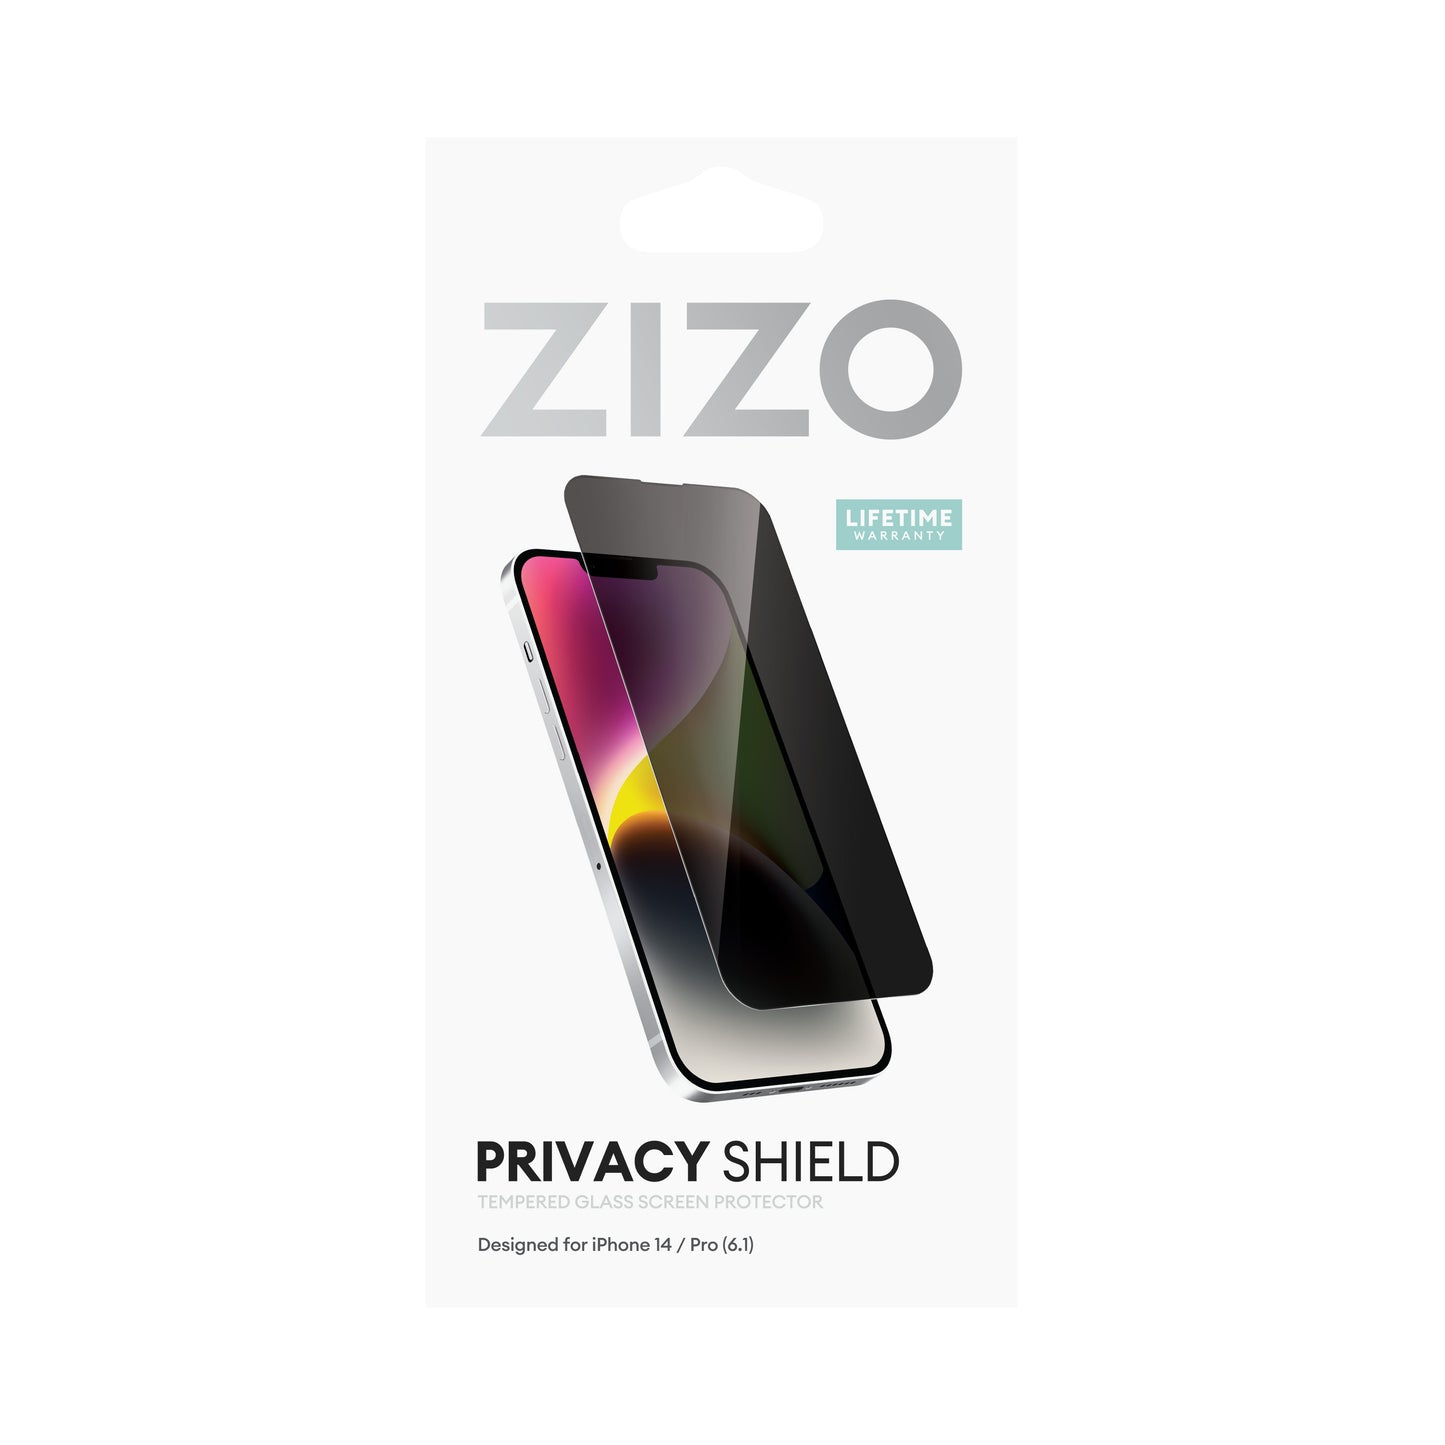 ZIZO PRIVACY Tempered Glass Screen Protector for iPhone 14, iPhone 13 - Privacy